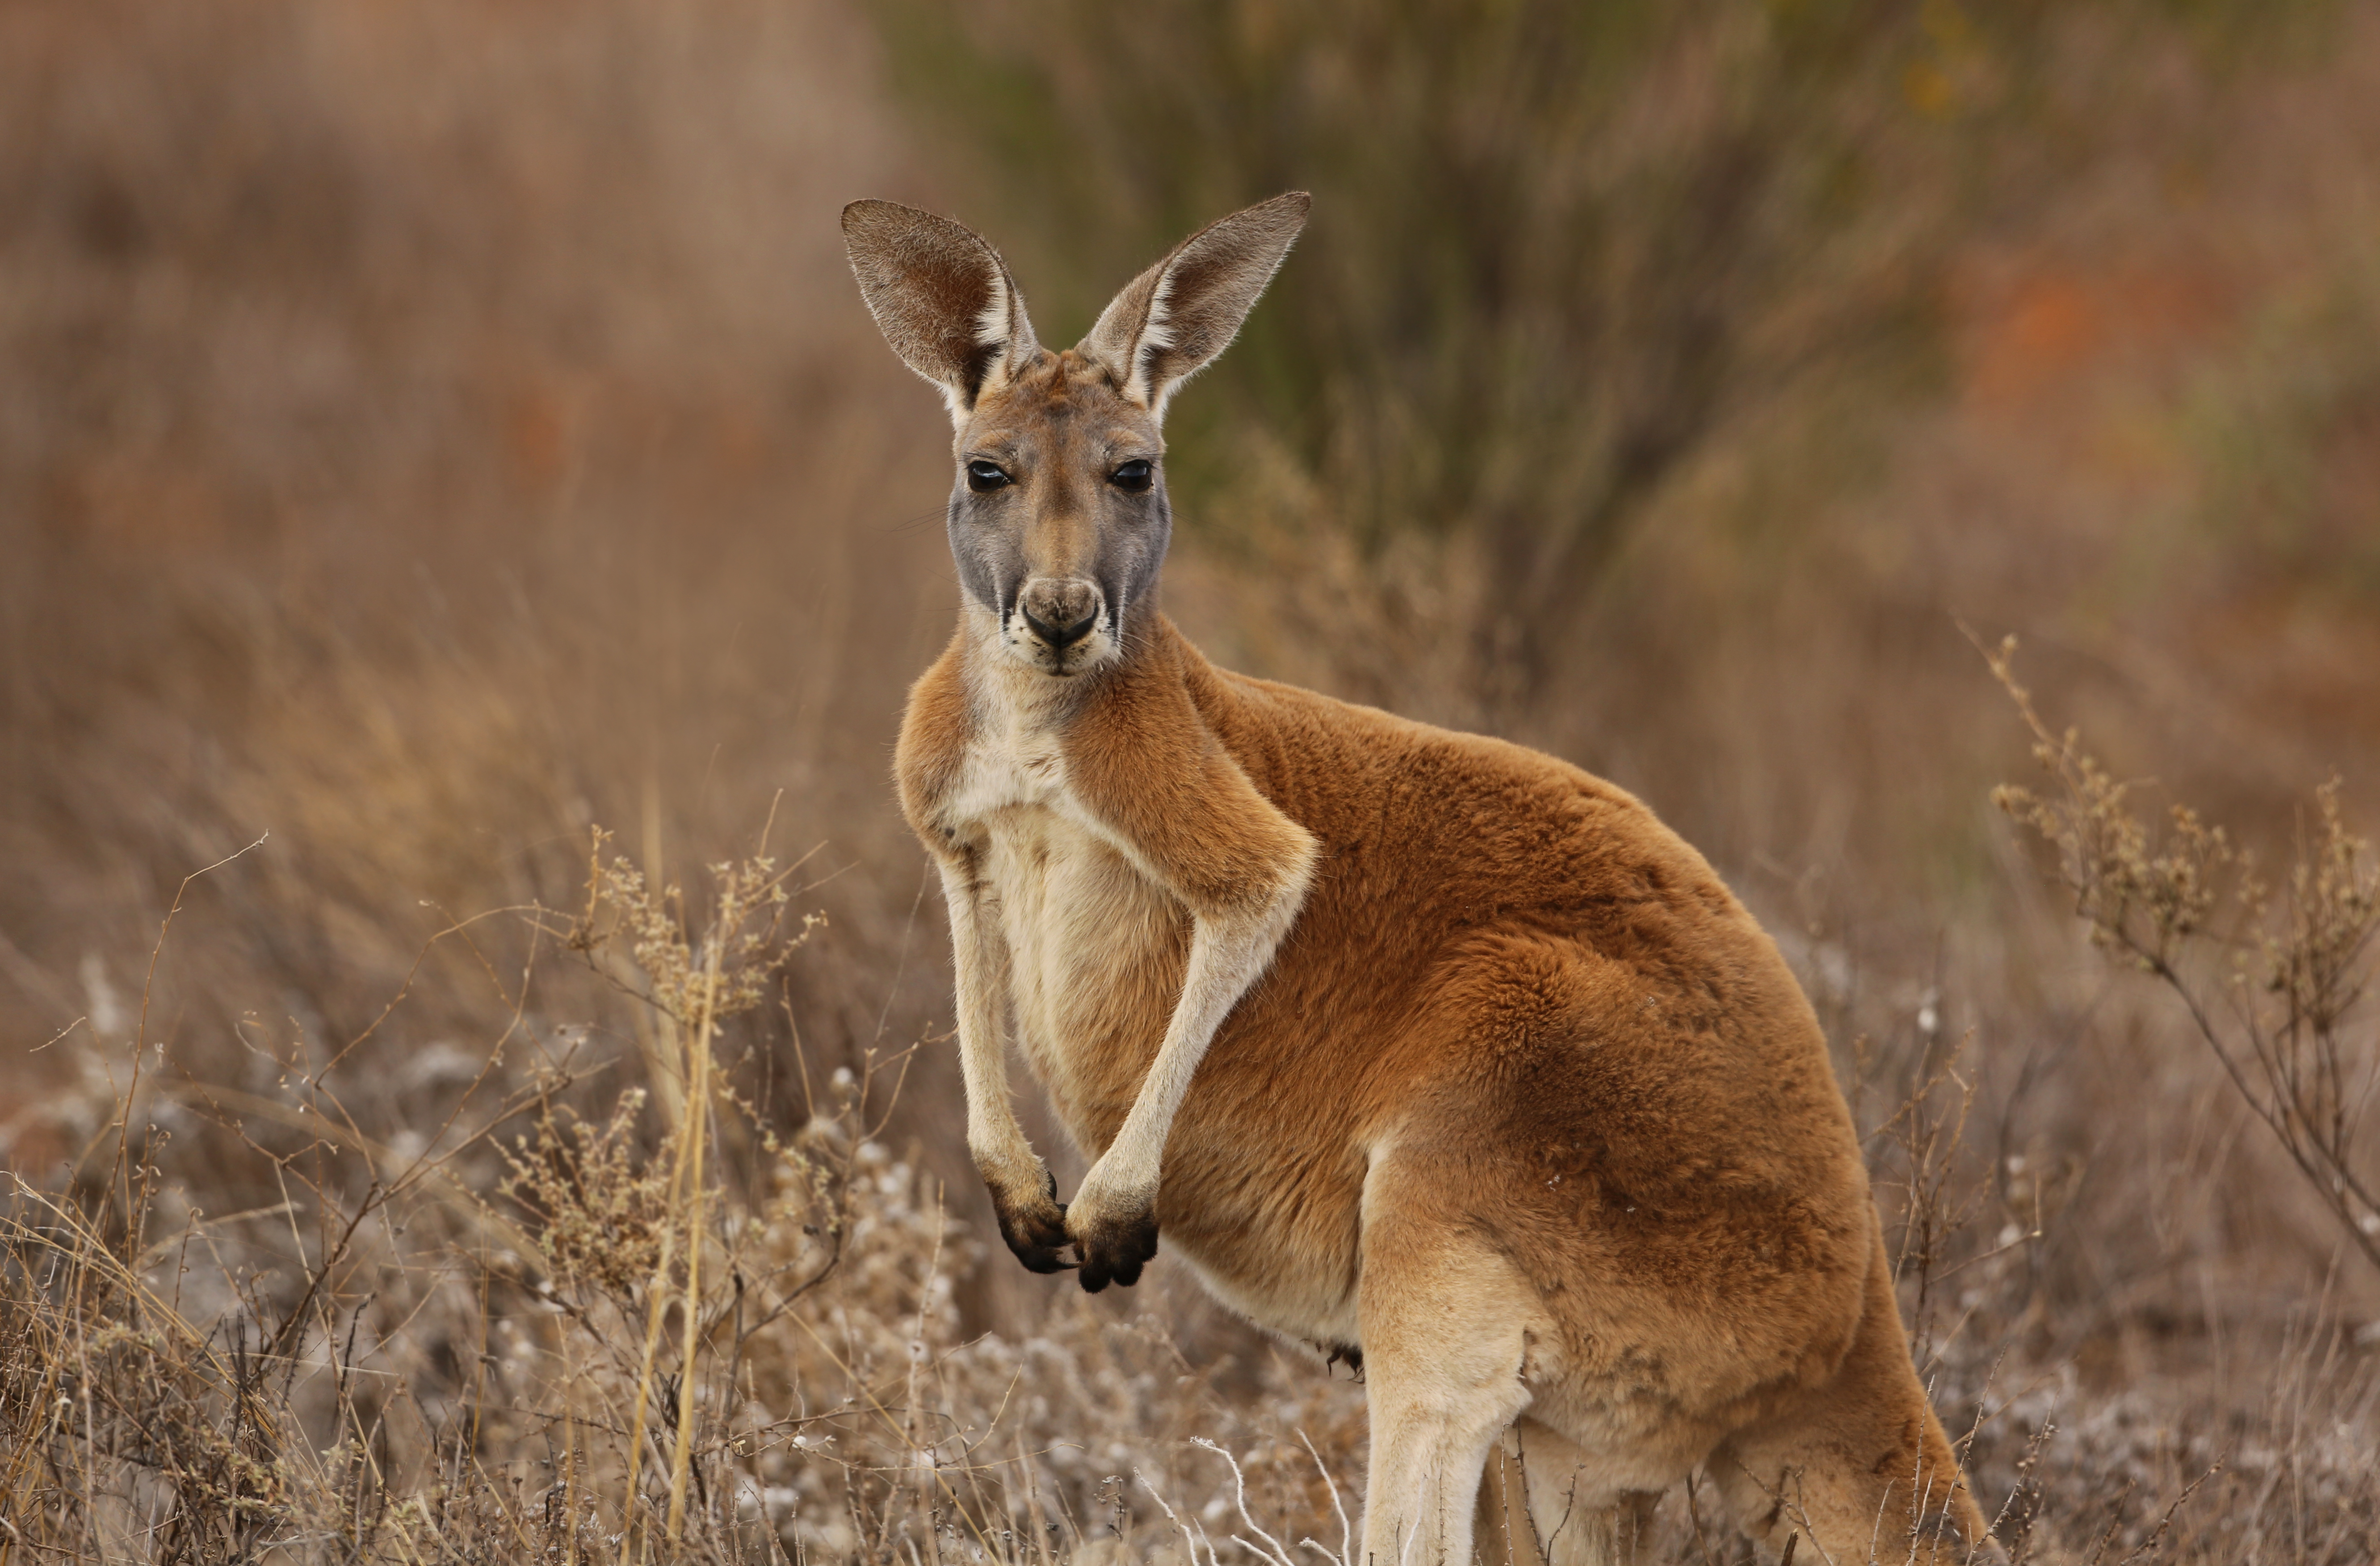 Australia Was Once Home To Swole Kangaroos Who Could Climb Trees & We Say: Bring Them Back